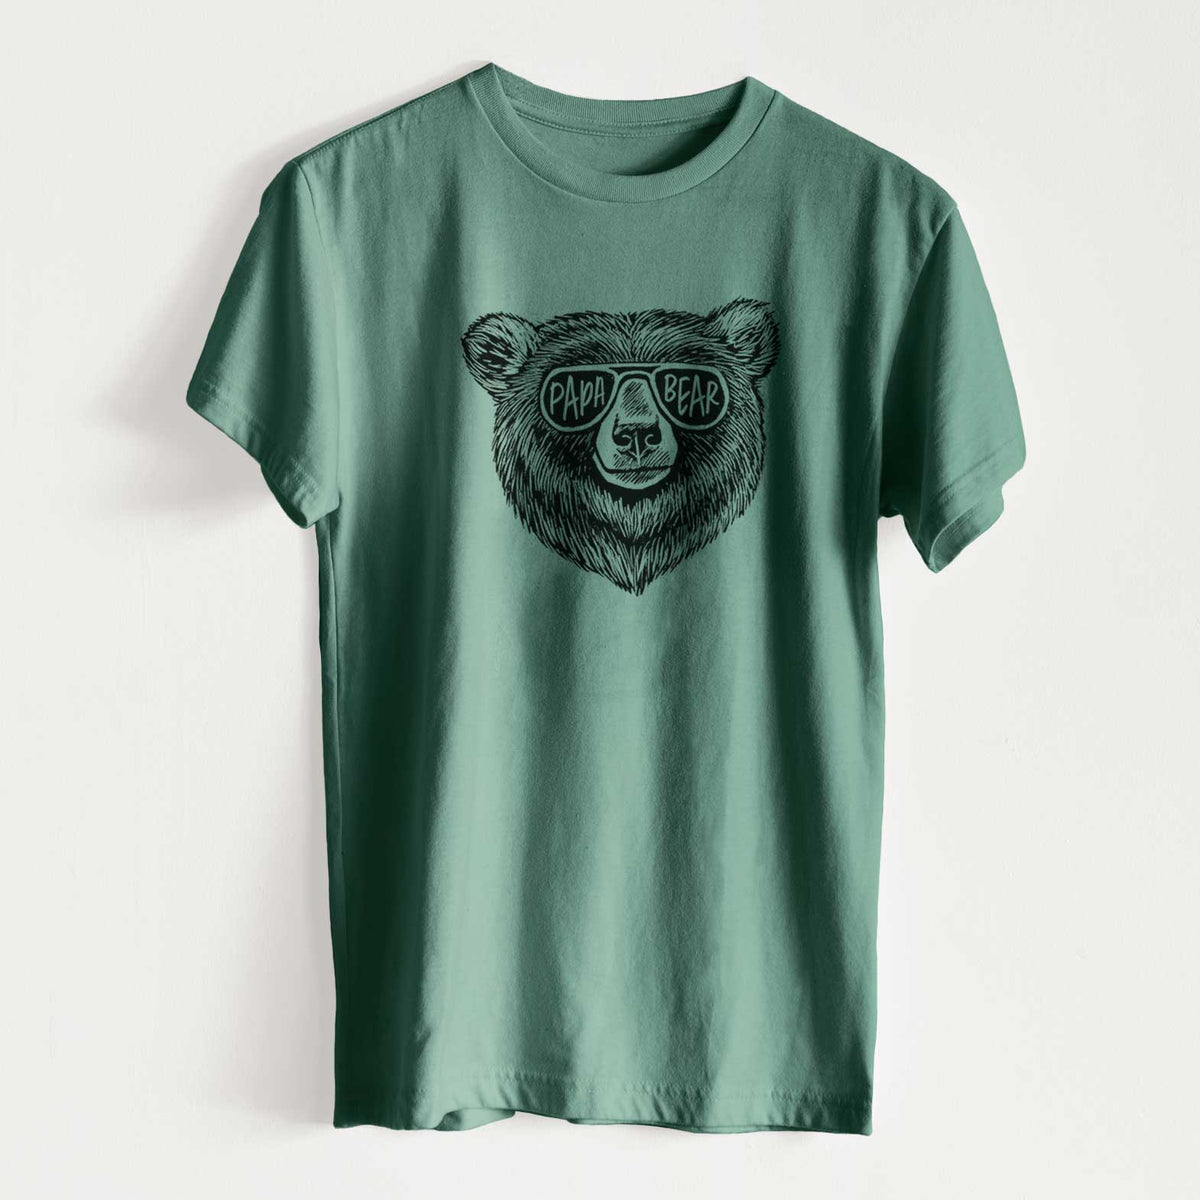 Papa Bear - Unisex Recycled Eco Tee  - CLOSEOUT - FINAL SALE